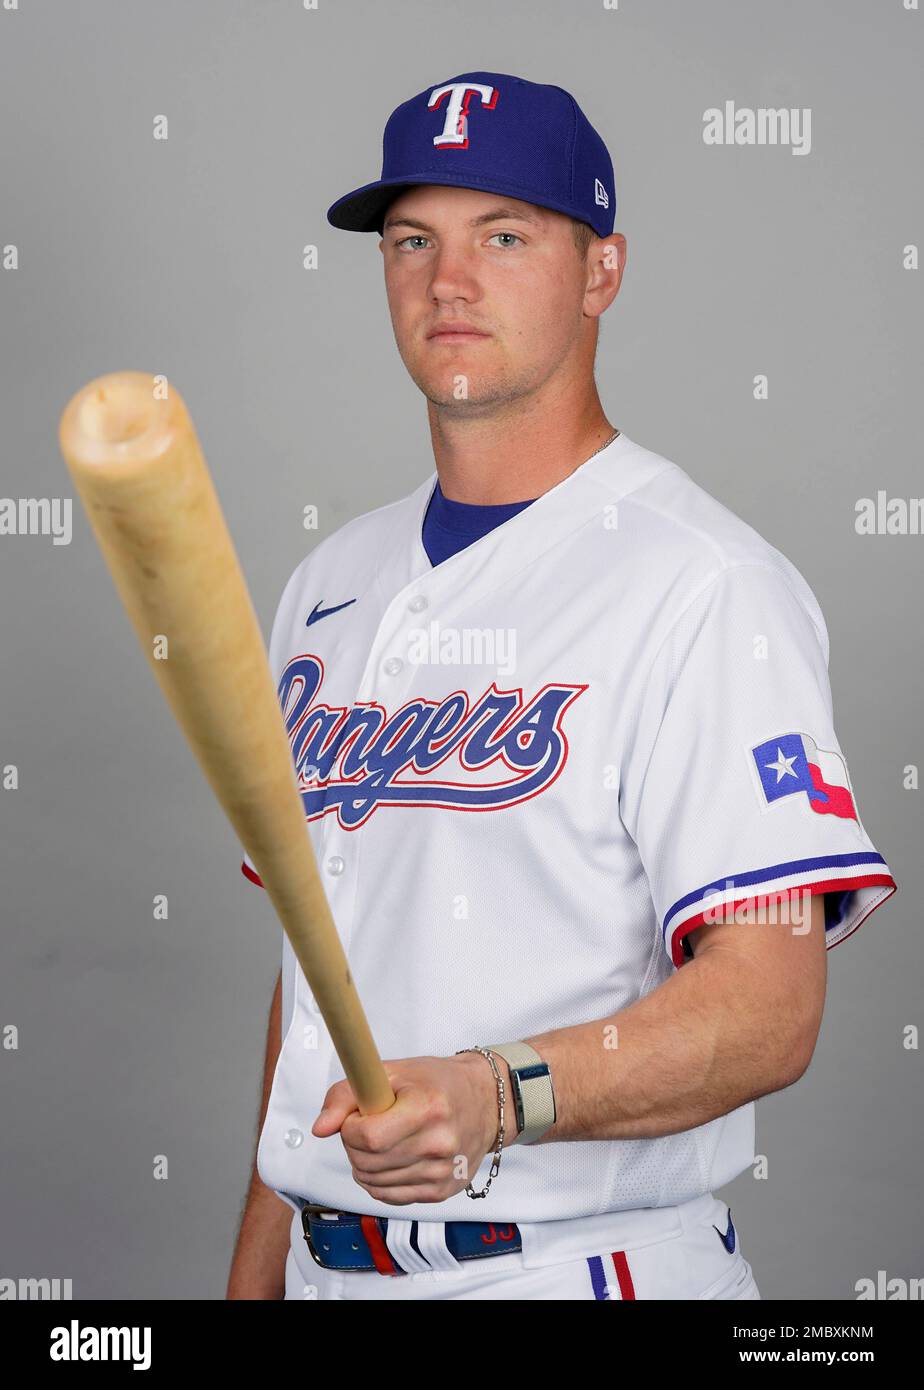 This is a 2022 photo of Josh Jung of the Texas Rangers' baseball